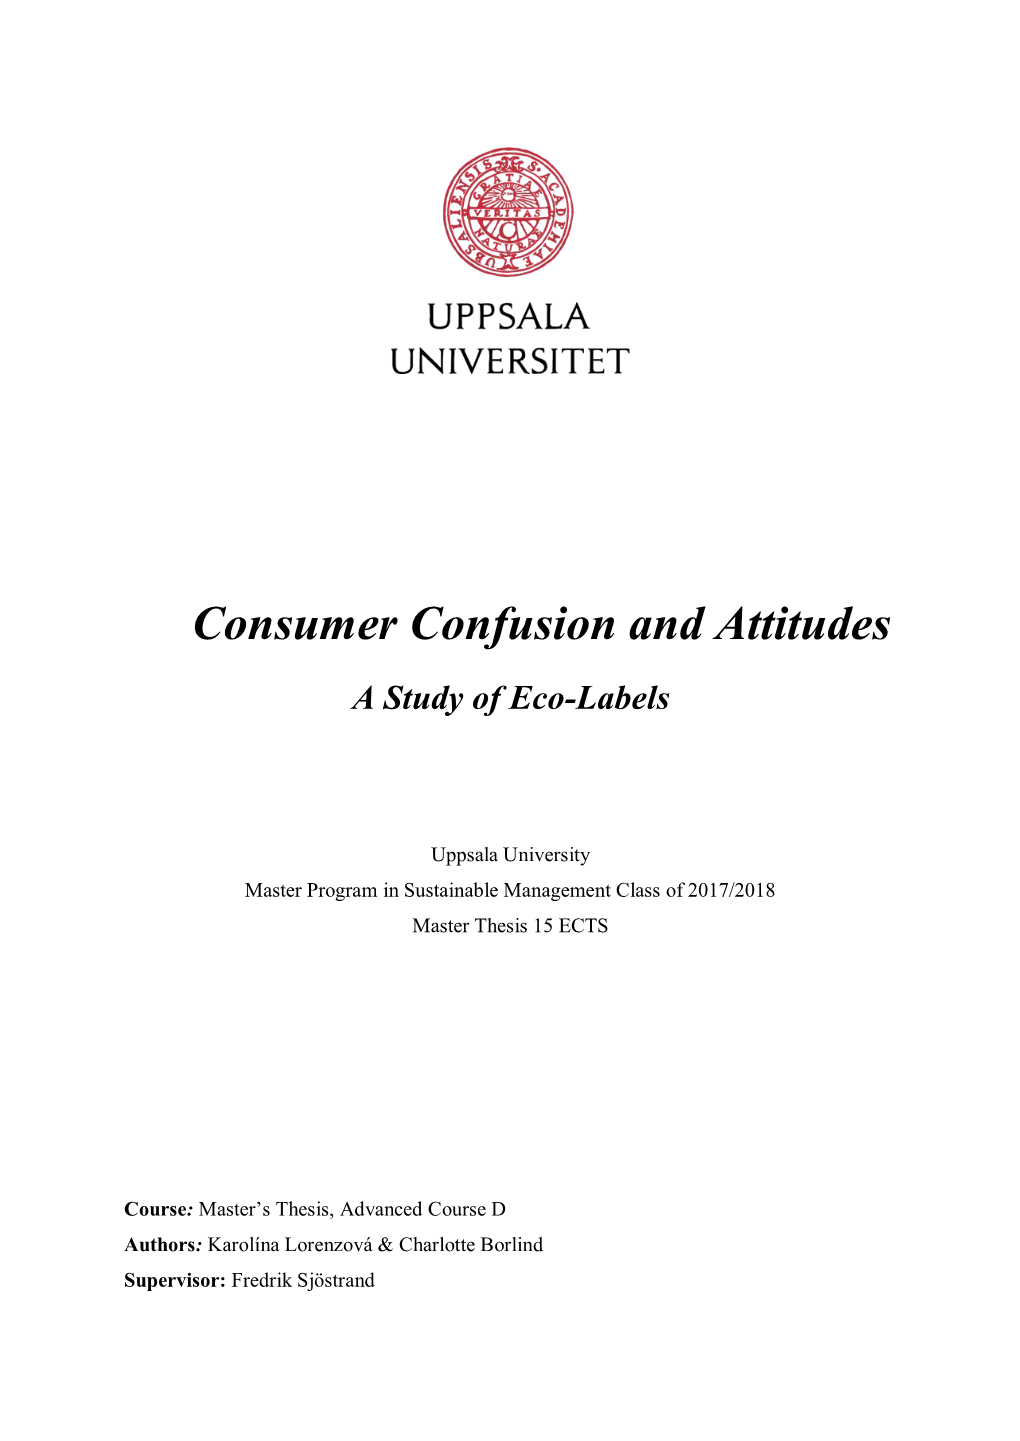 Consumer Confusion and Attitudes a Study of Eco-Labels